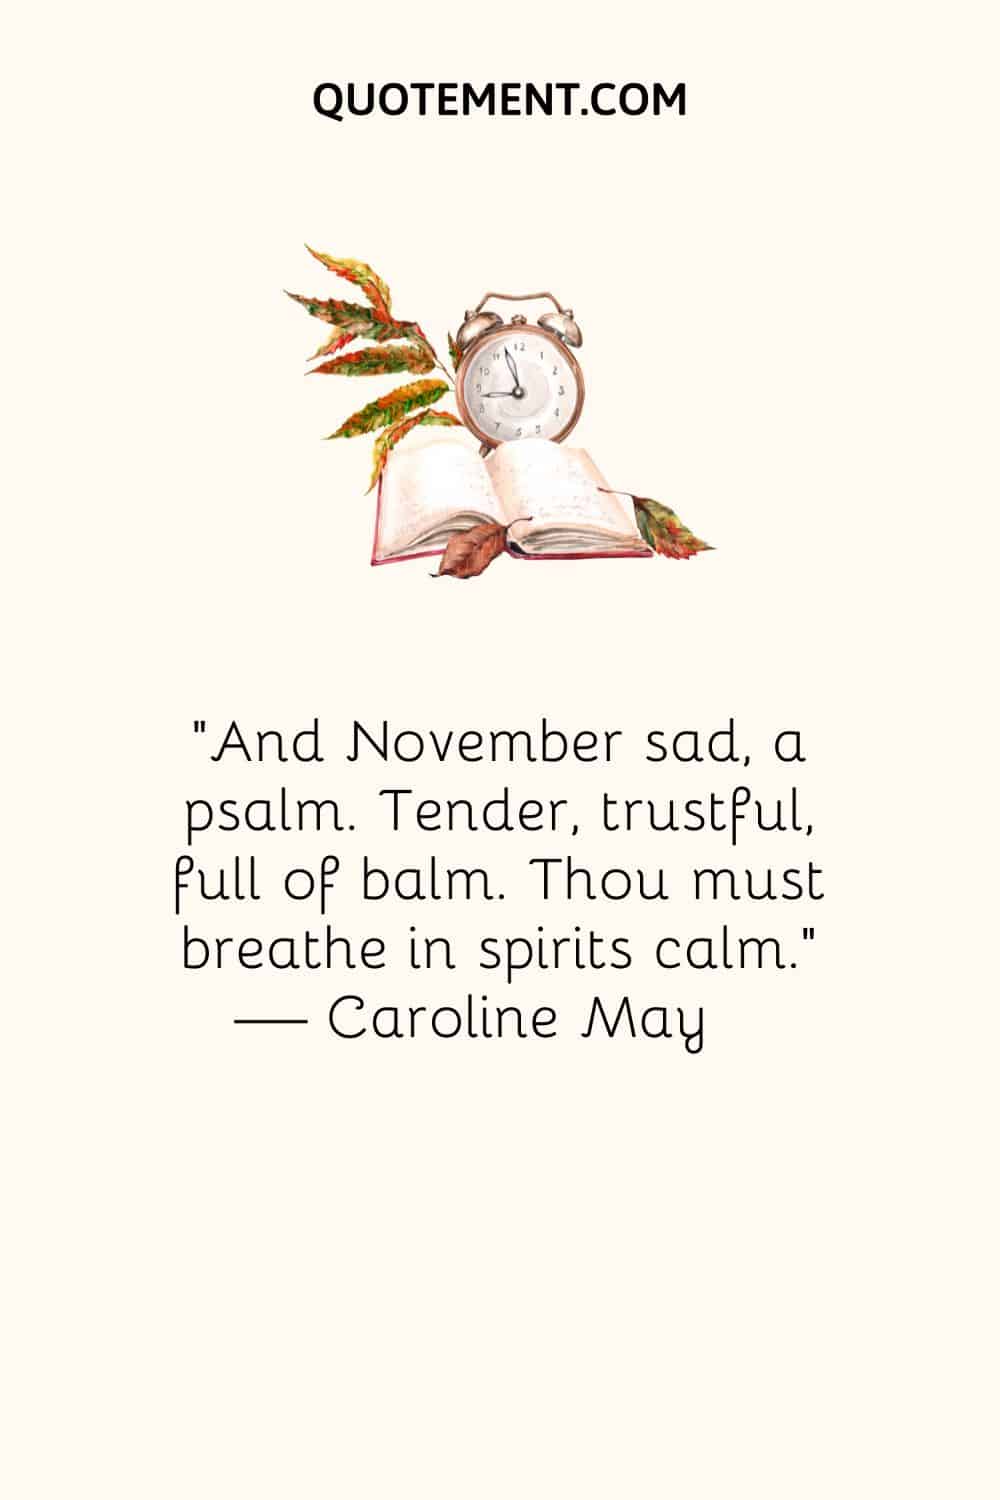 And November sad, a psalm. Tender, trustful, full of balm. Thou must breathe in spirits calm.